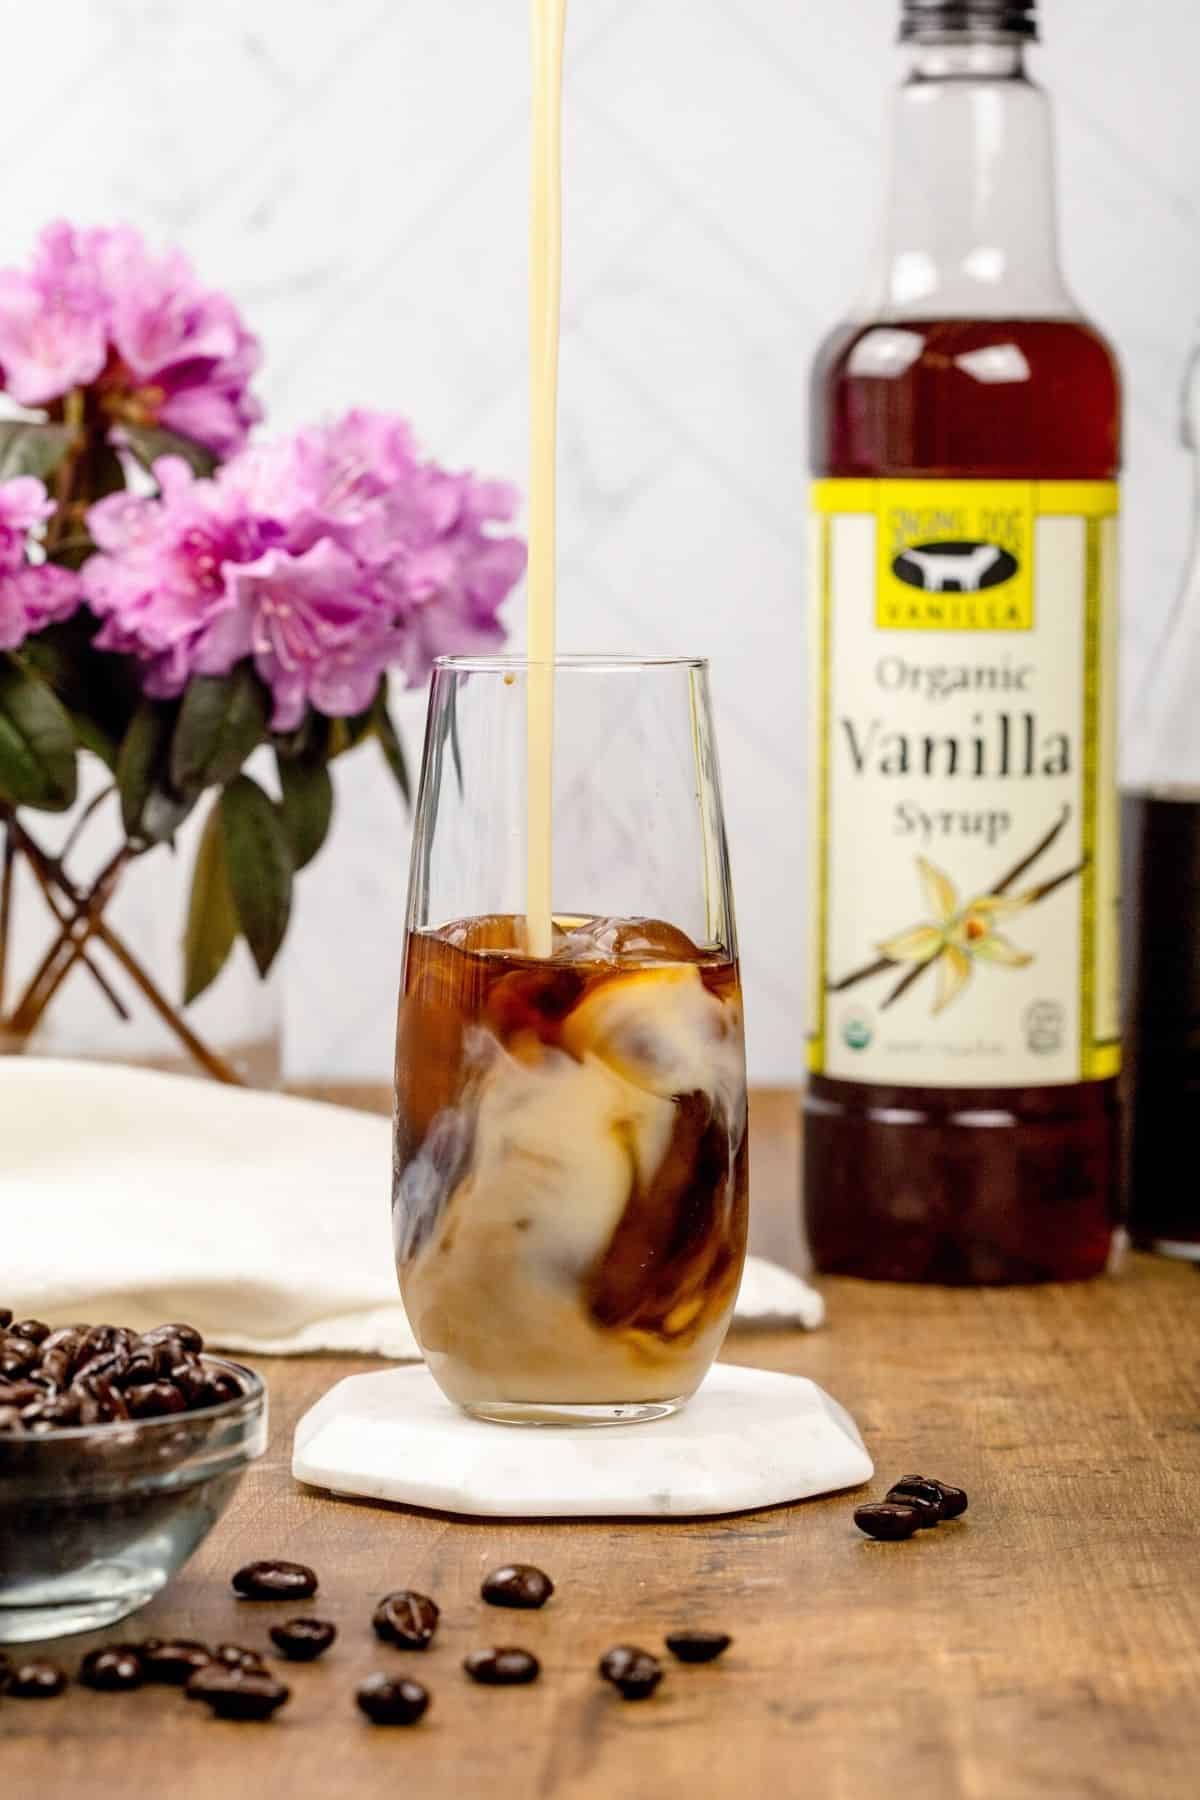 Pouring sweet vanilla cream into a glass cup on a wood tabletop. A jar of vanilla syrup and flowers are blurred in the background. Coffee beans are in the front of the cup.